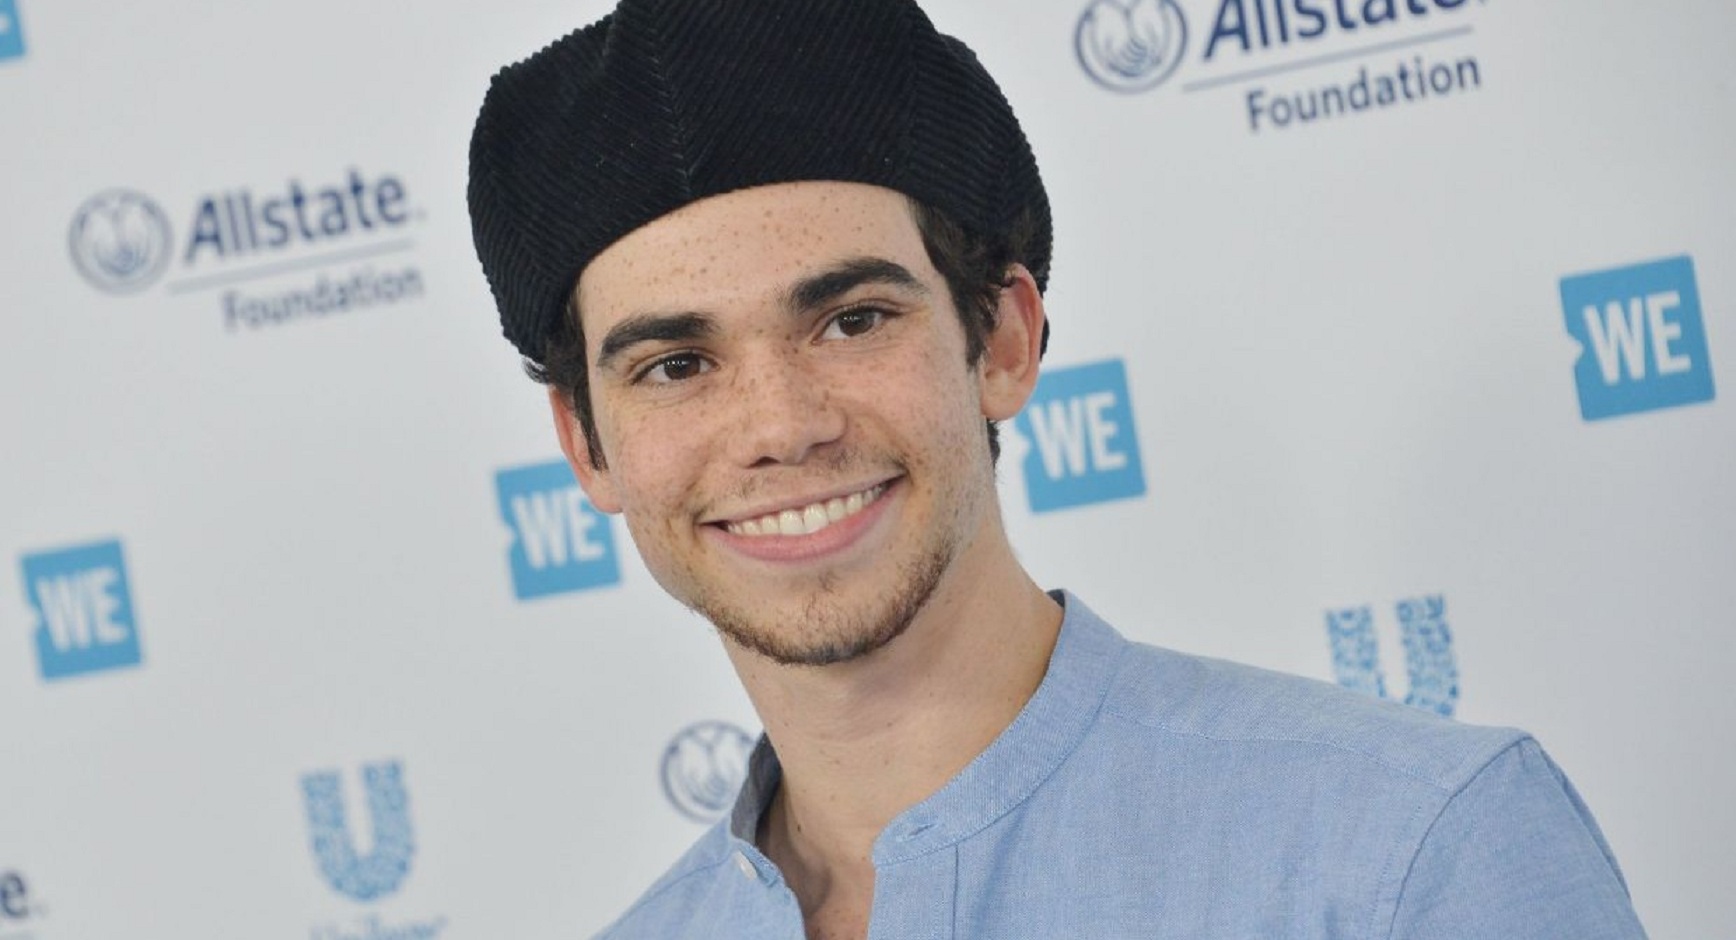 Disney Actor Cameron Boyce Has Passed Away at Age 20